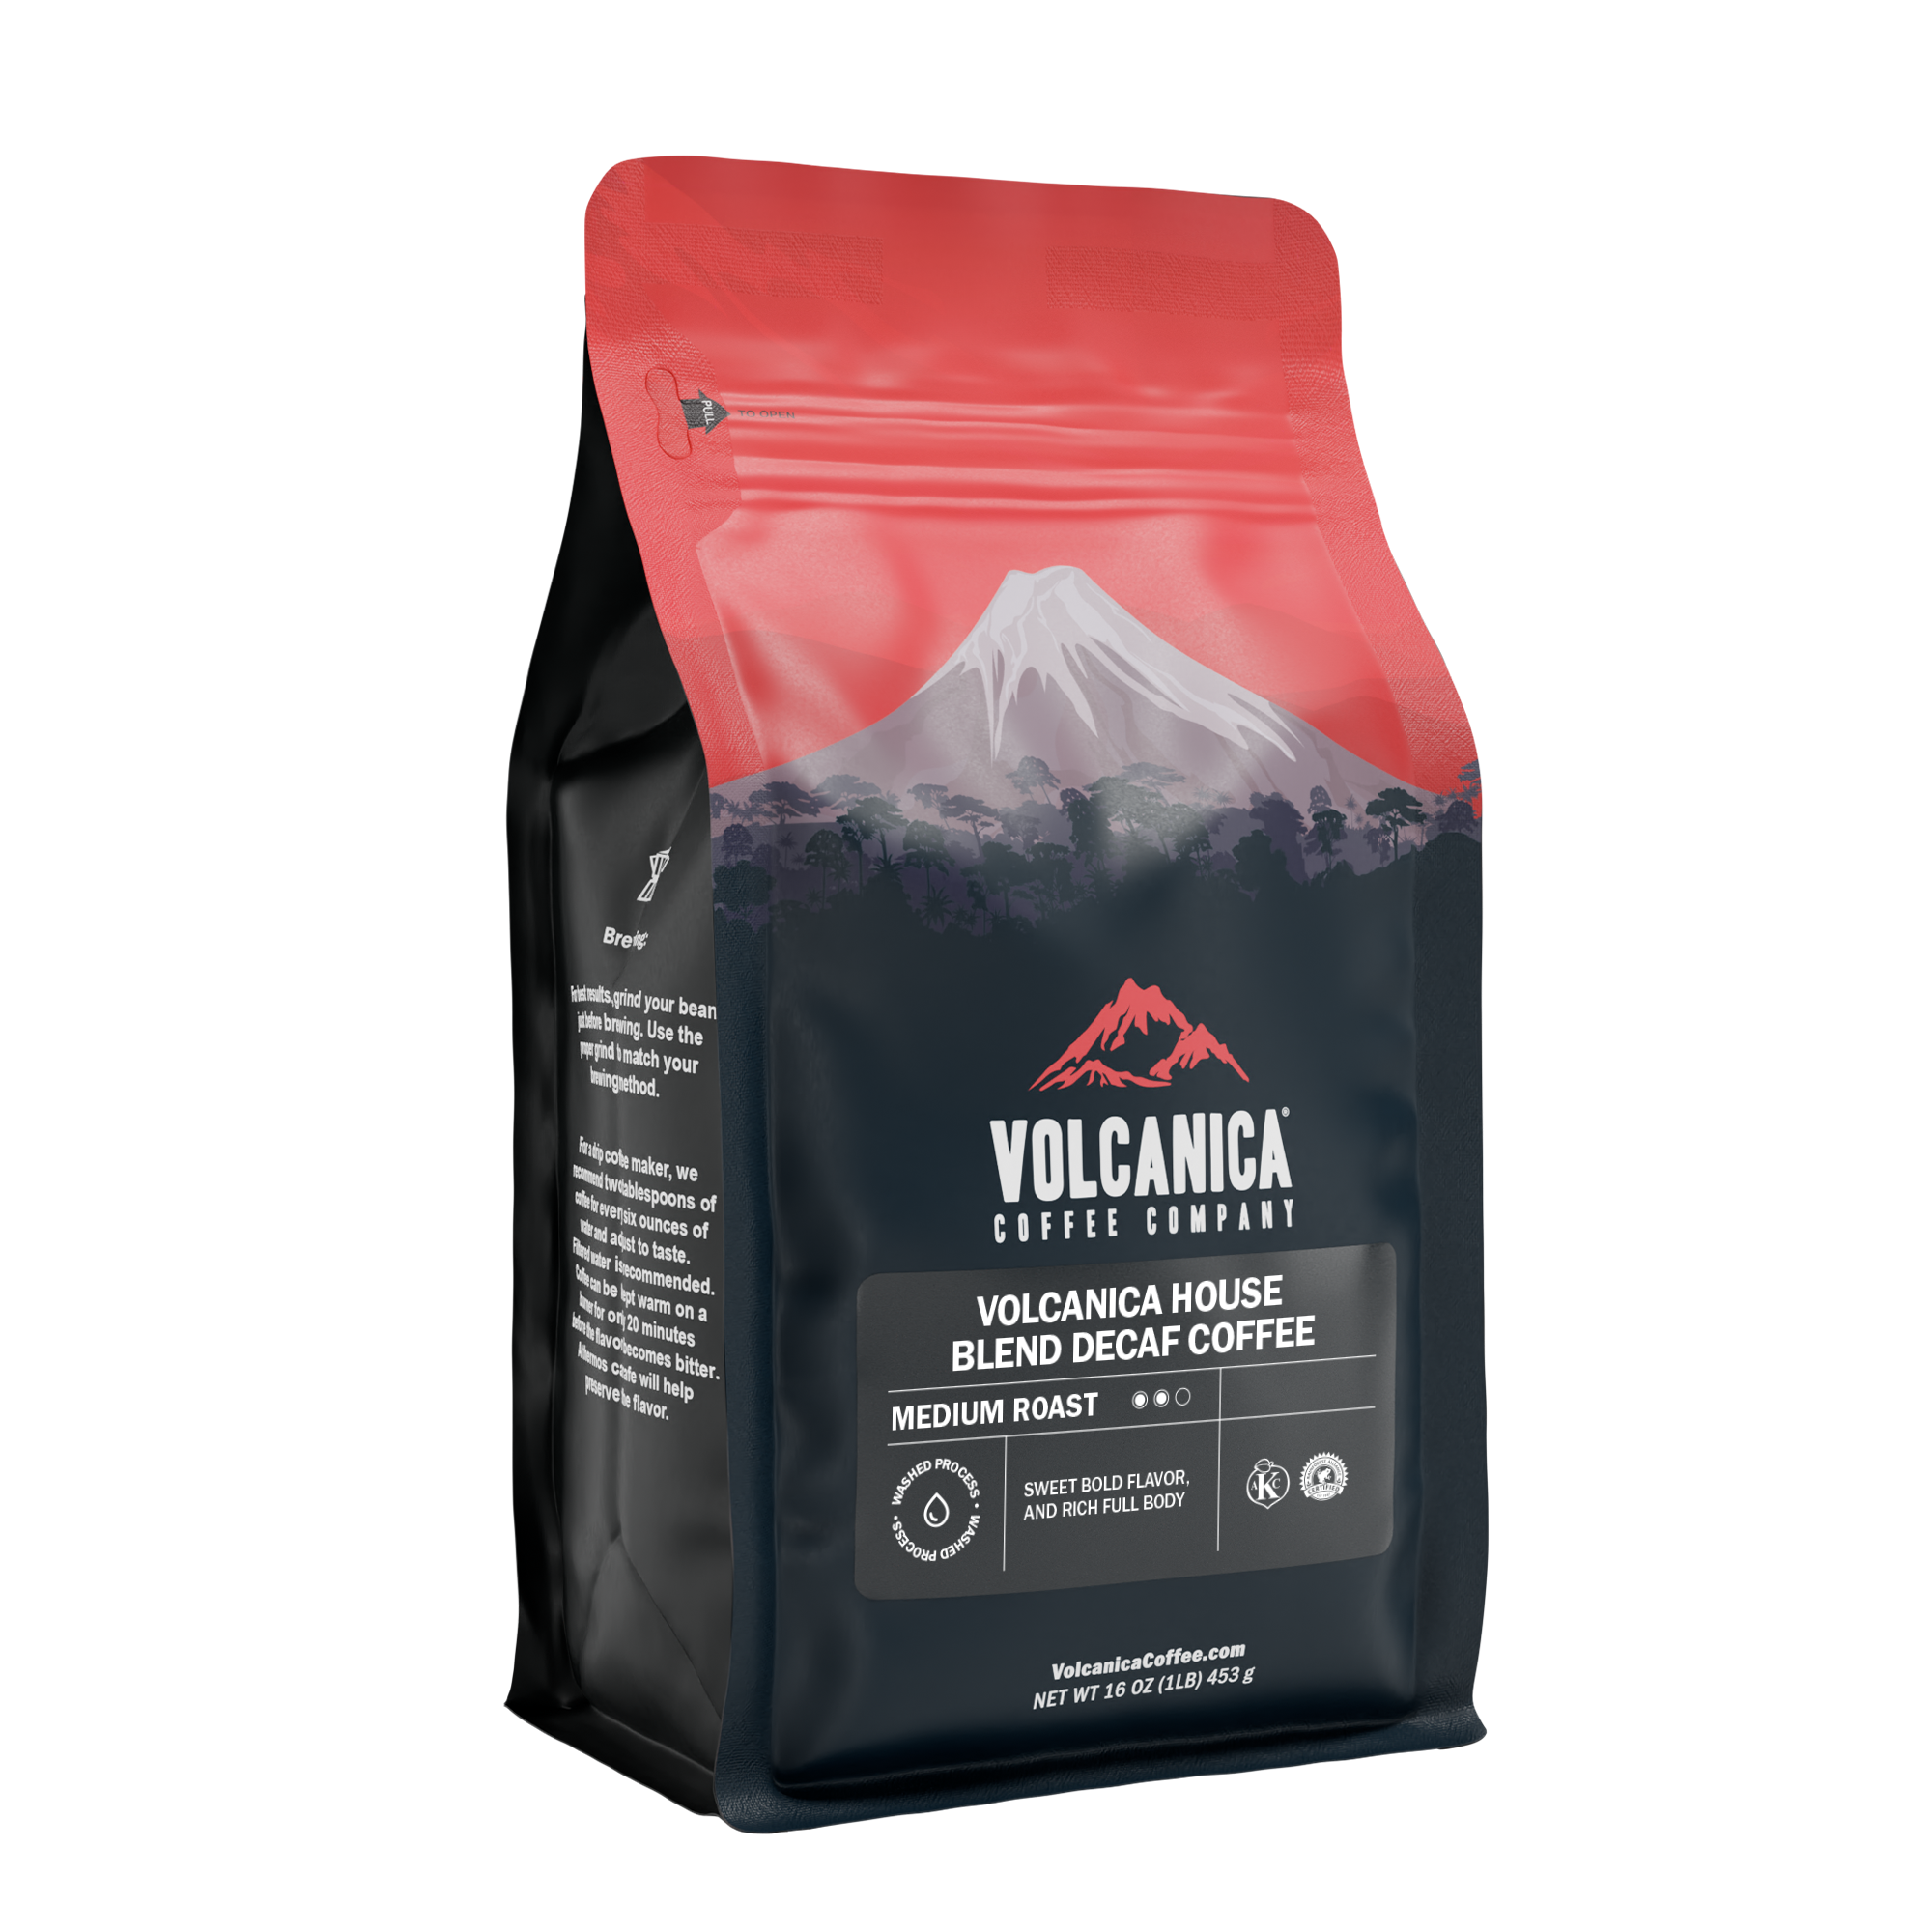 Volcanica House Blend Decaf Coffee - Volcanica Coffee